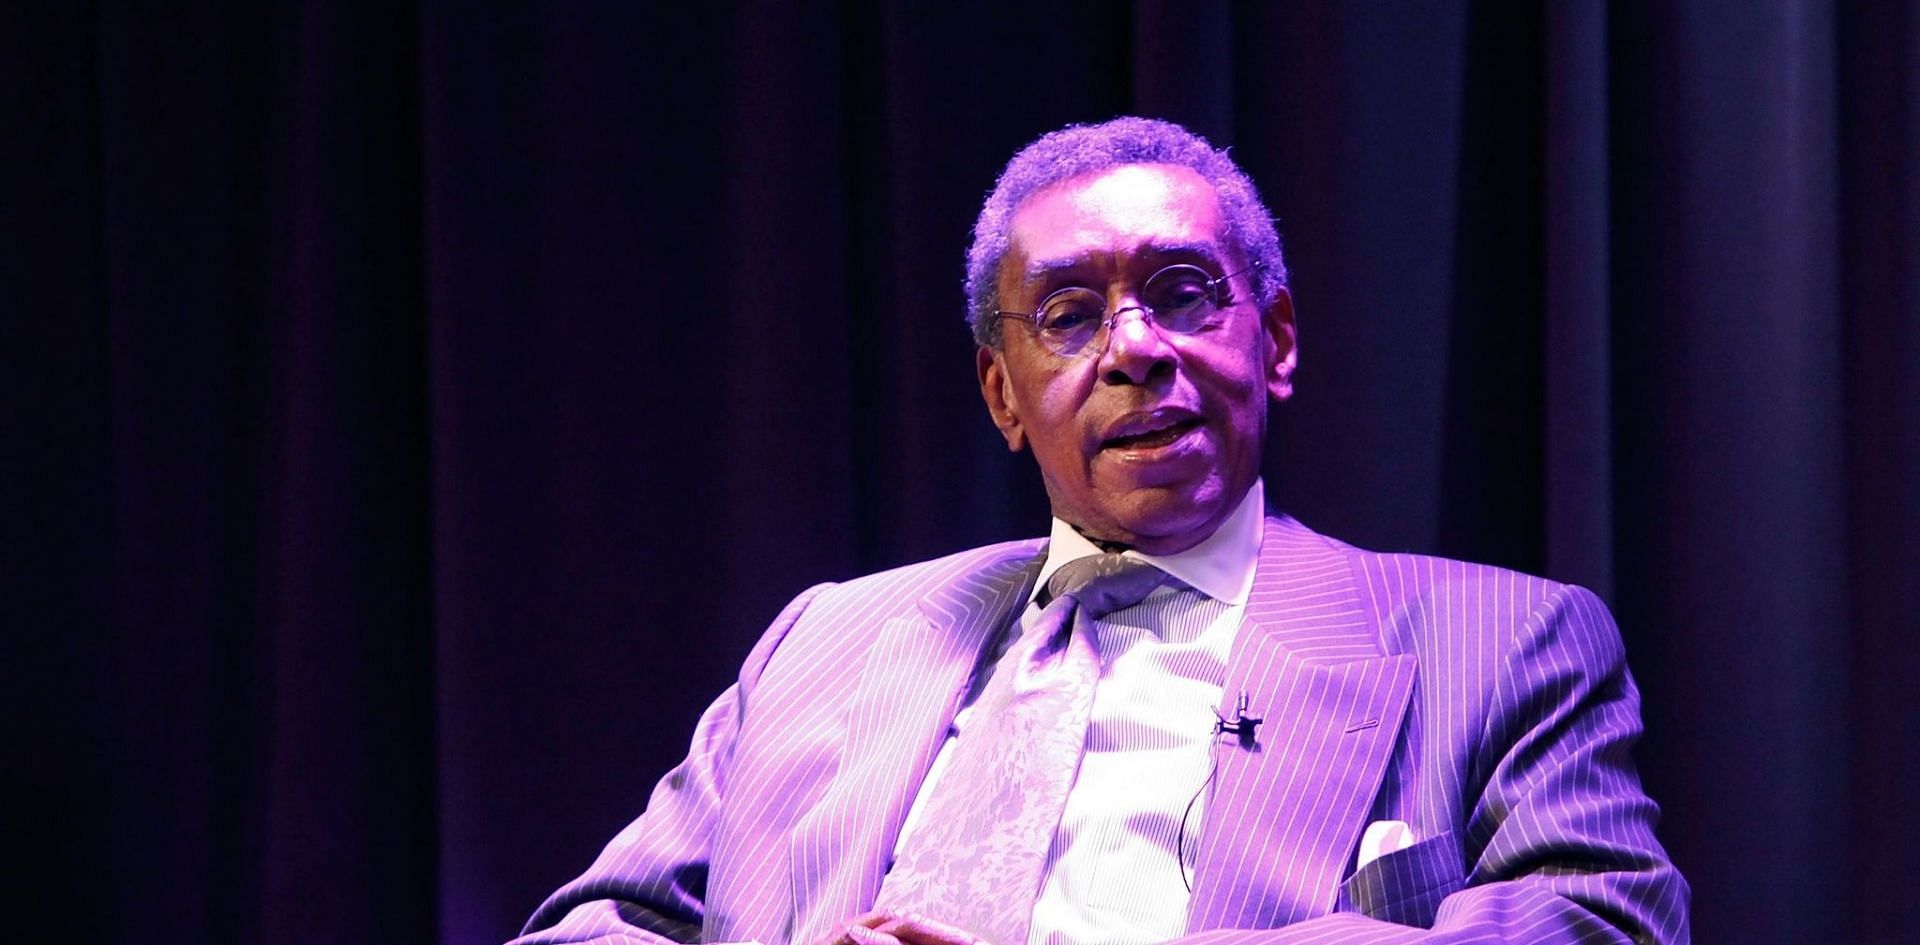 Don Cornelius passed away due to a self-inflicted gunshot wound (Image via Paul Archuleta/Getty Images)